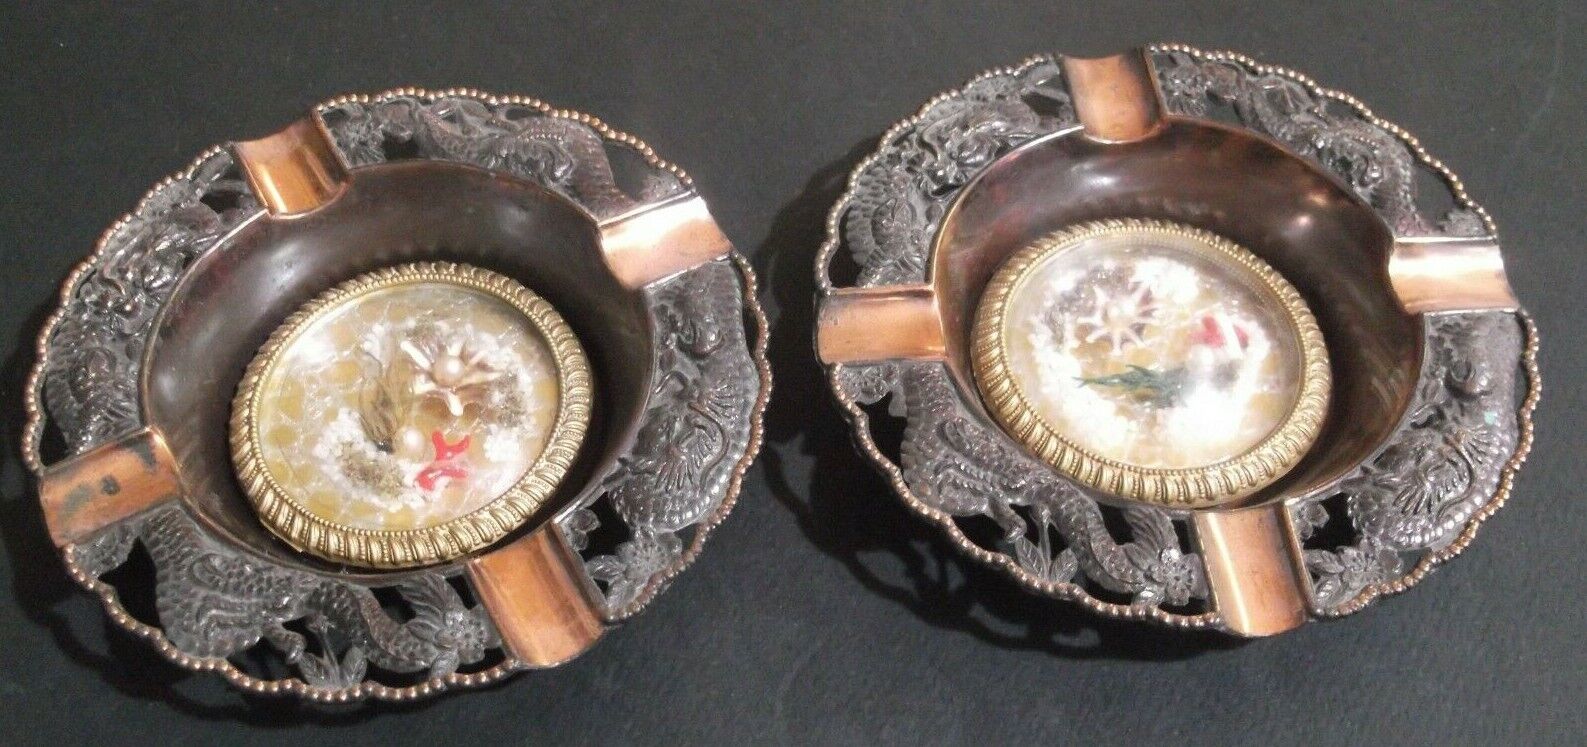 Vintage Set of 2 Ashtrays with Sea Bed Scene w/ 2 pearls and one shellfish each